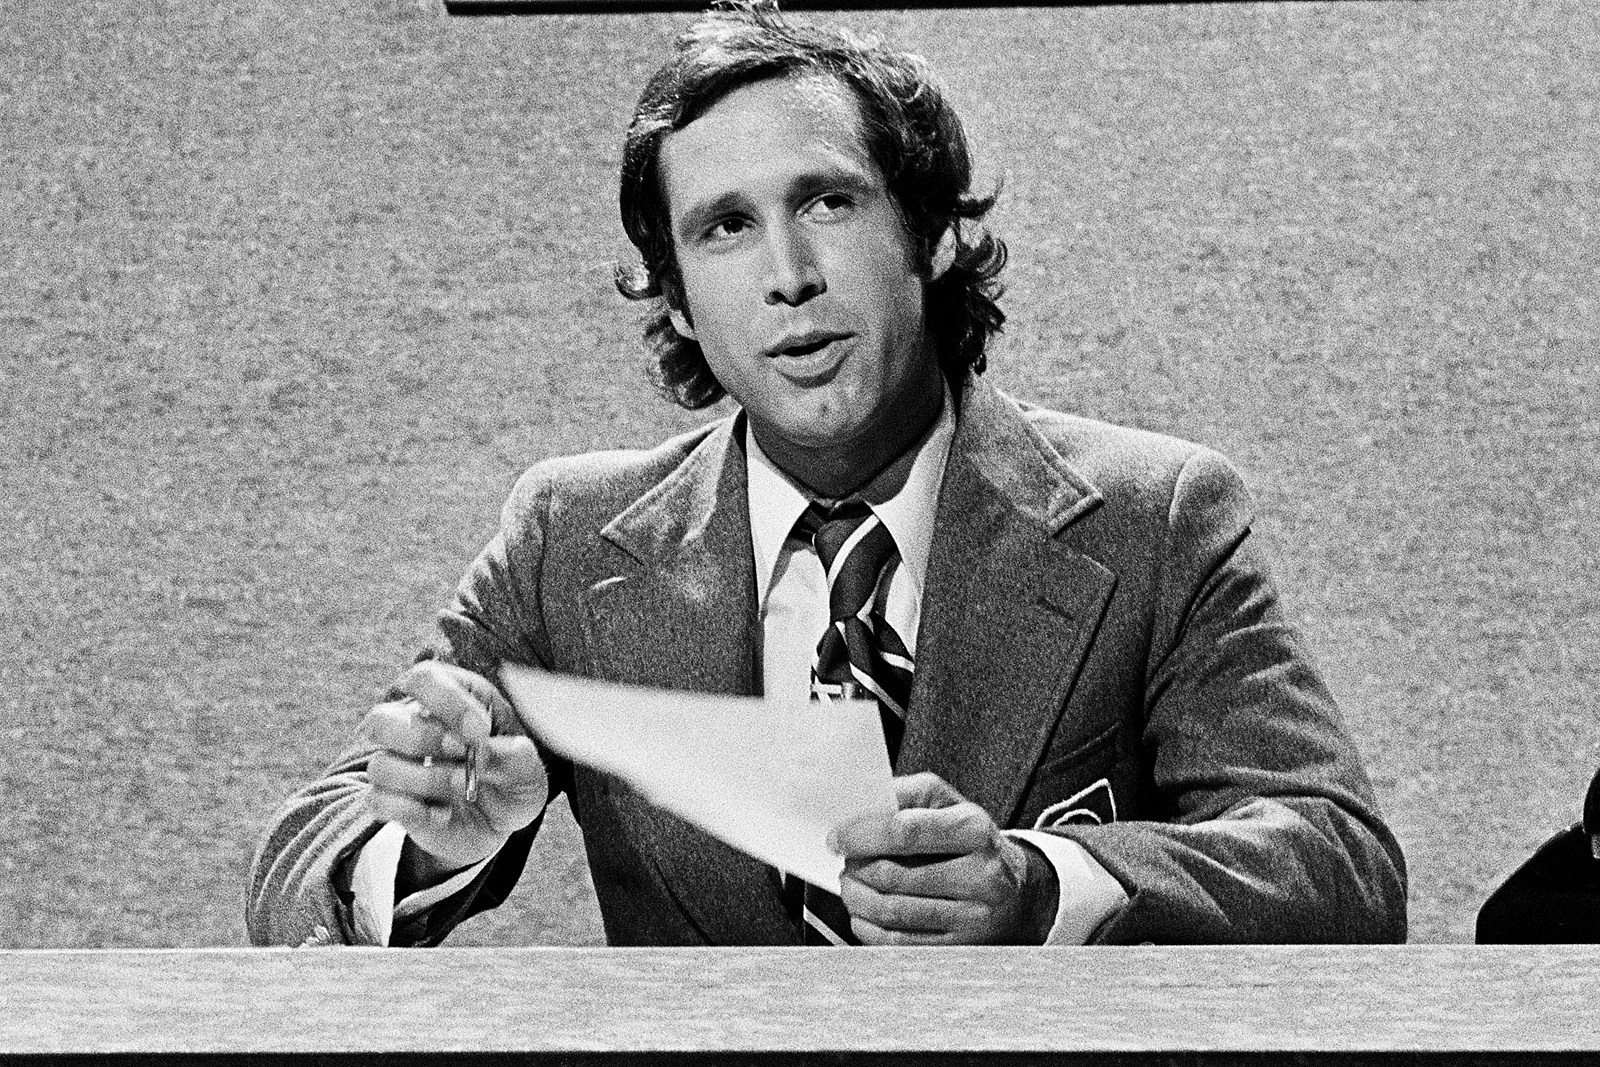 45 Years Ago: Chevy Chase Leaves ‘SNL’ — But Not For Good